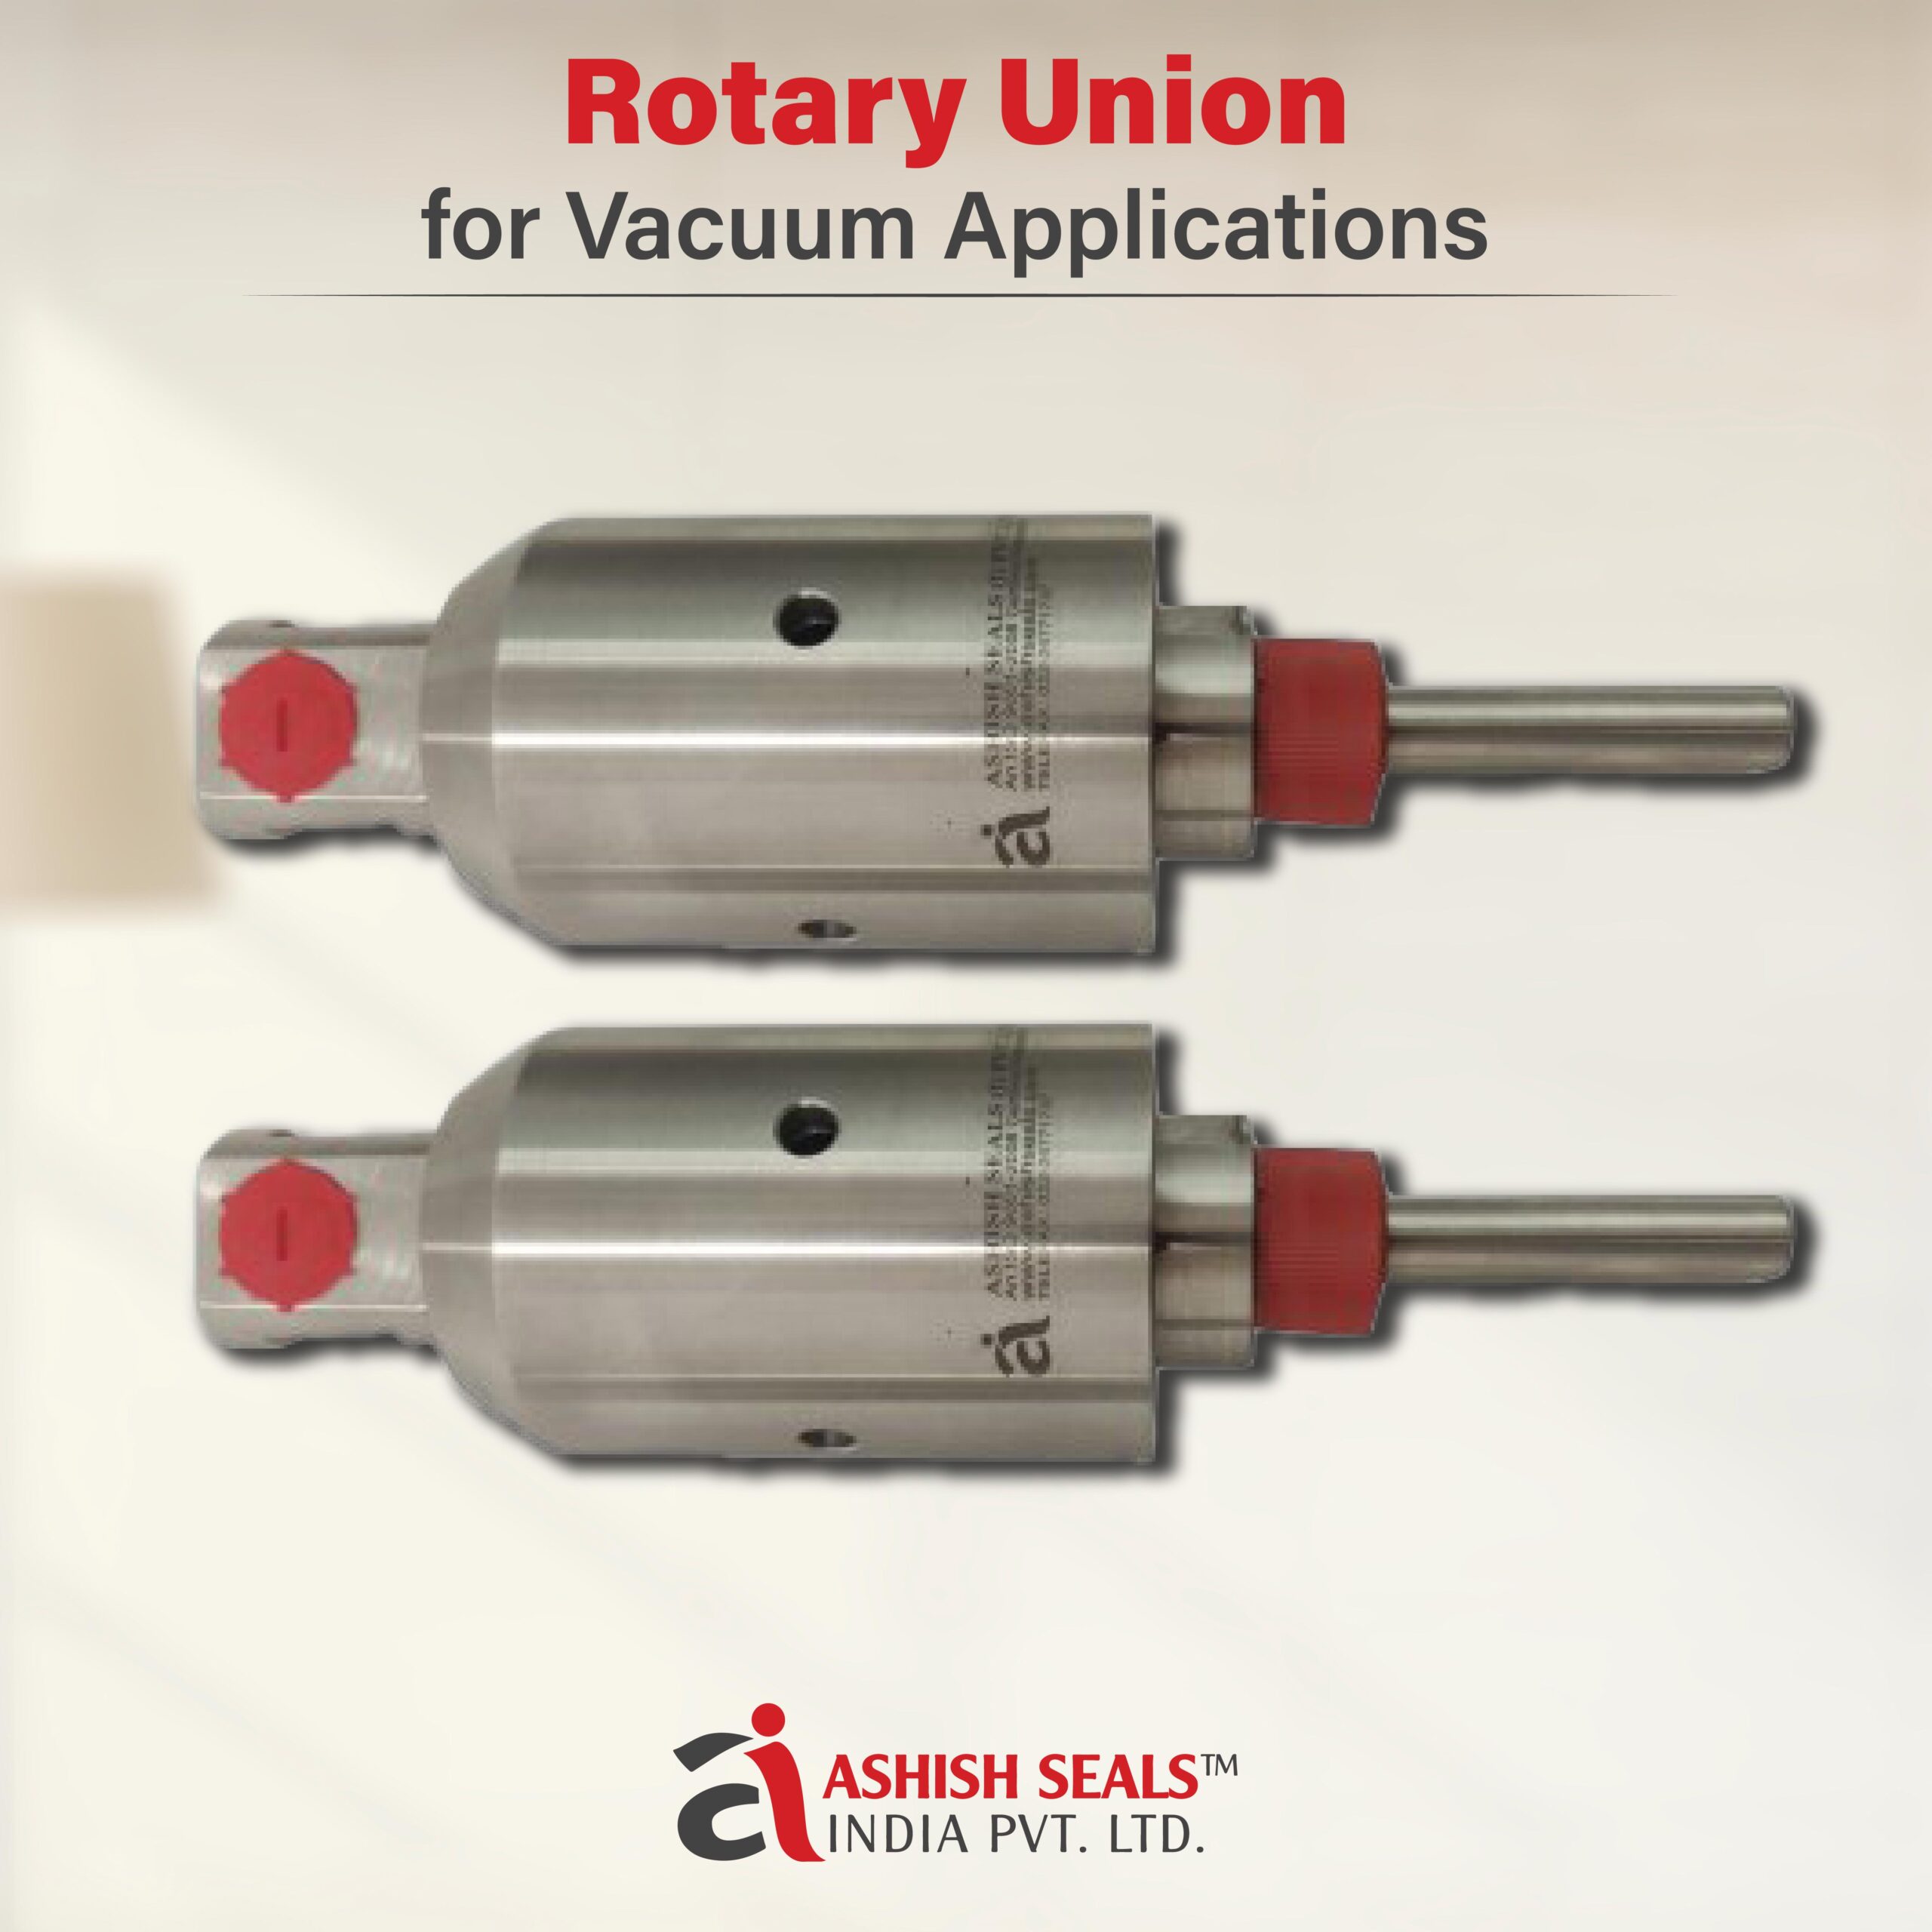 Rotary Unions for Vacuum Applications